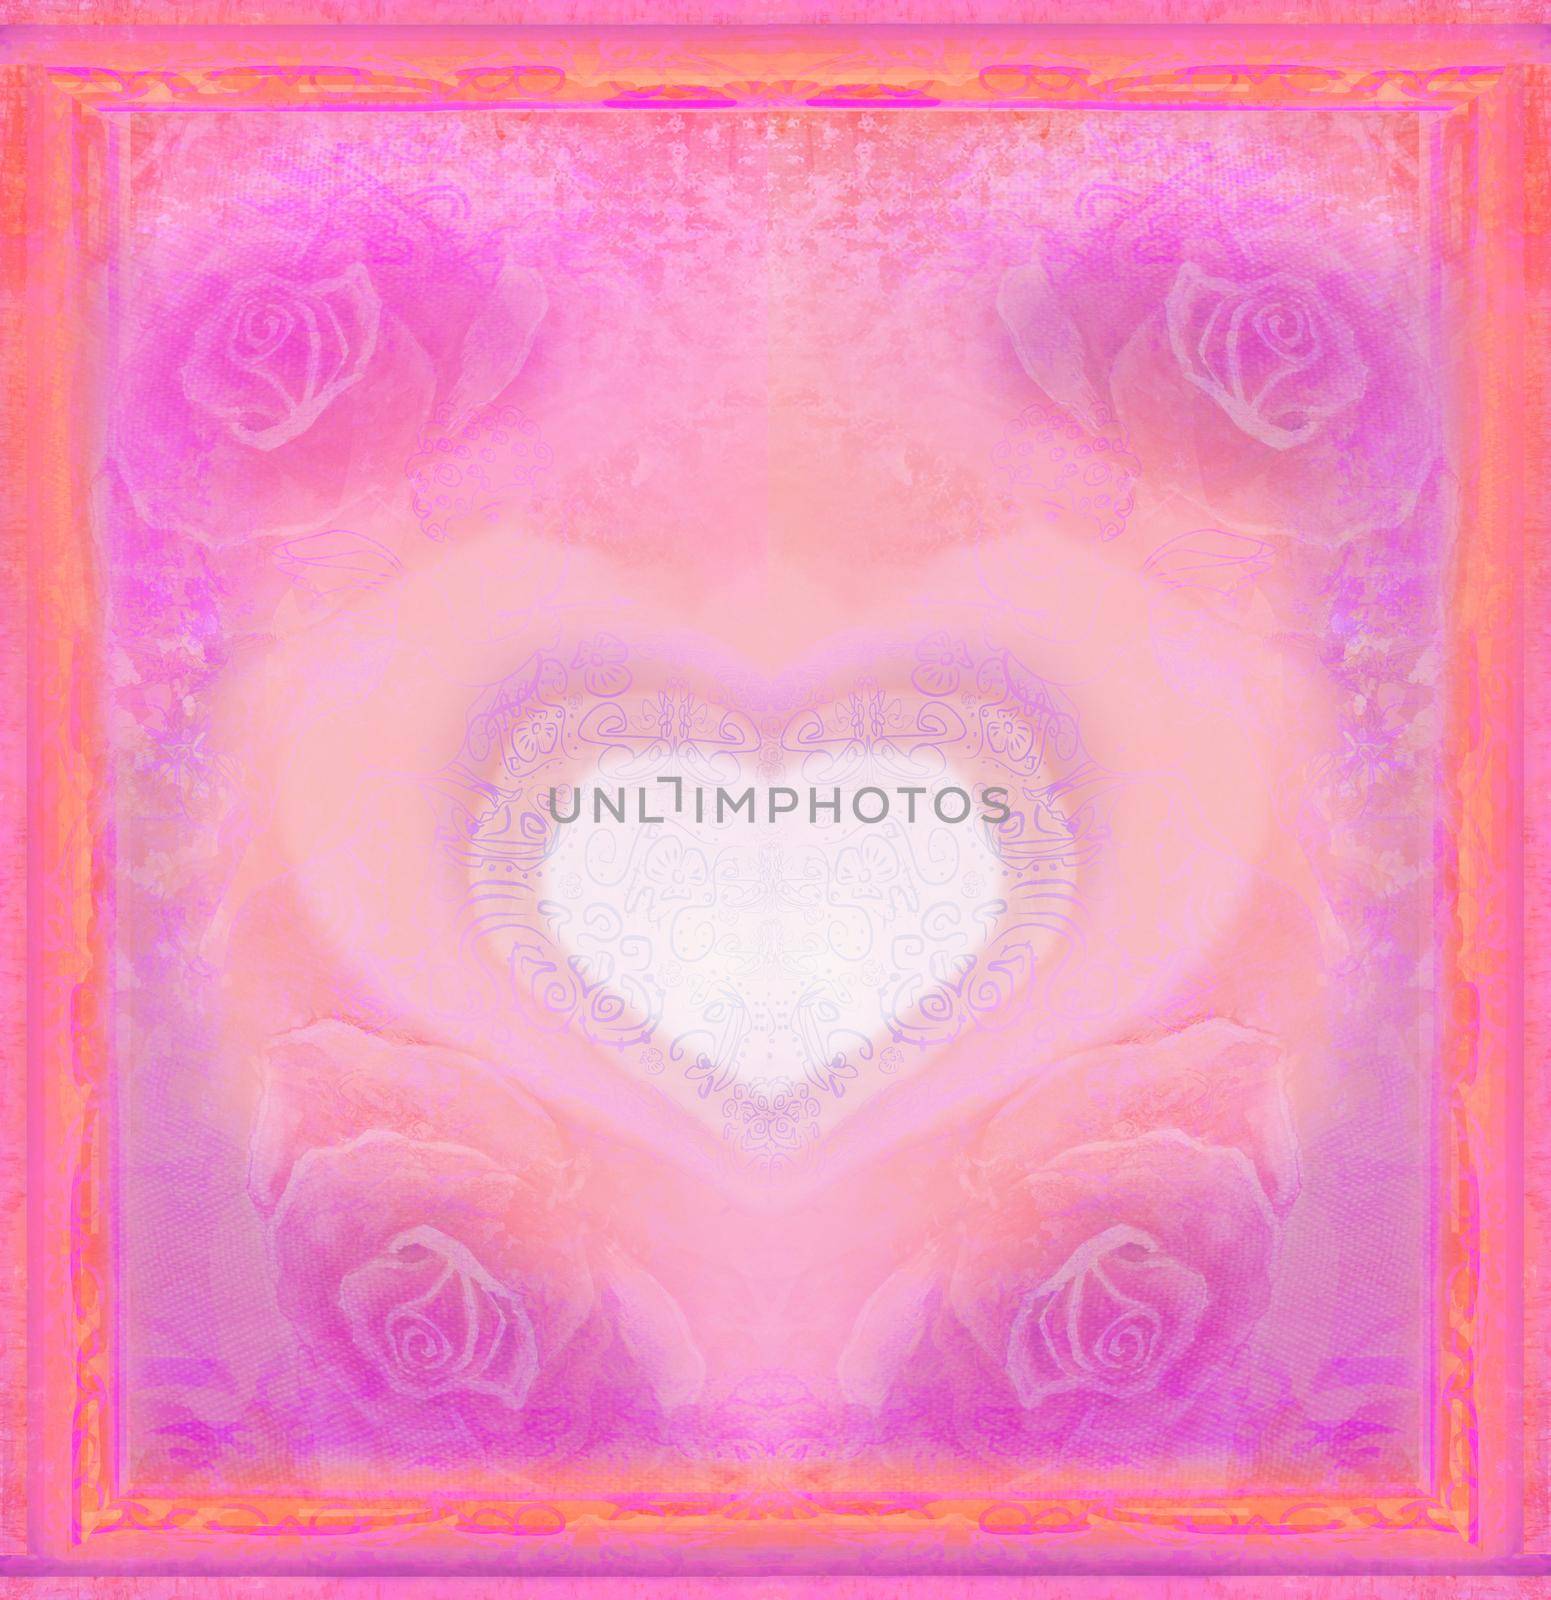 Heart with frame and copyspace for your text by JackyBrown